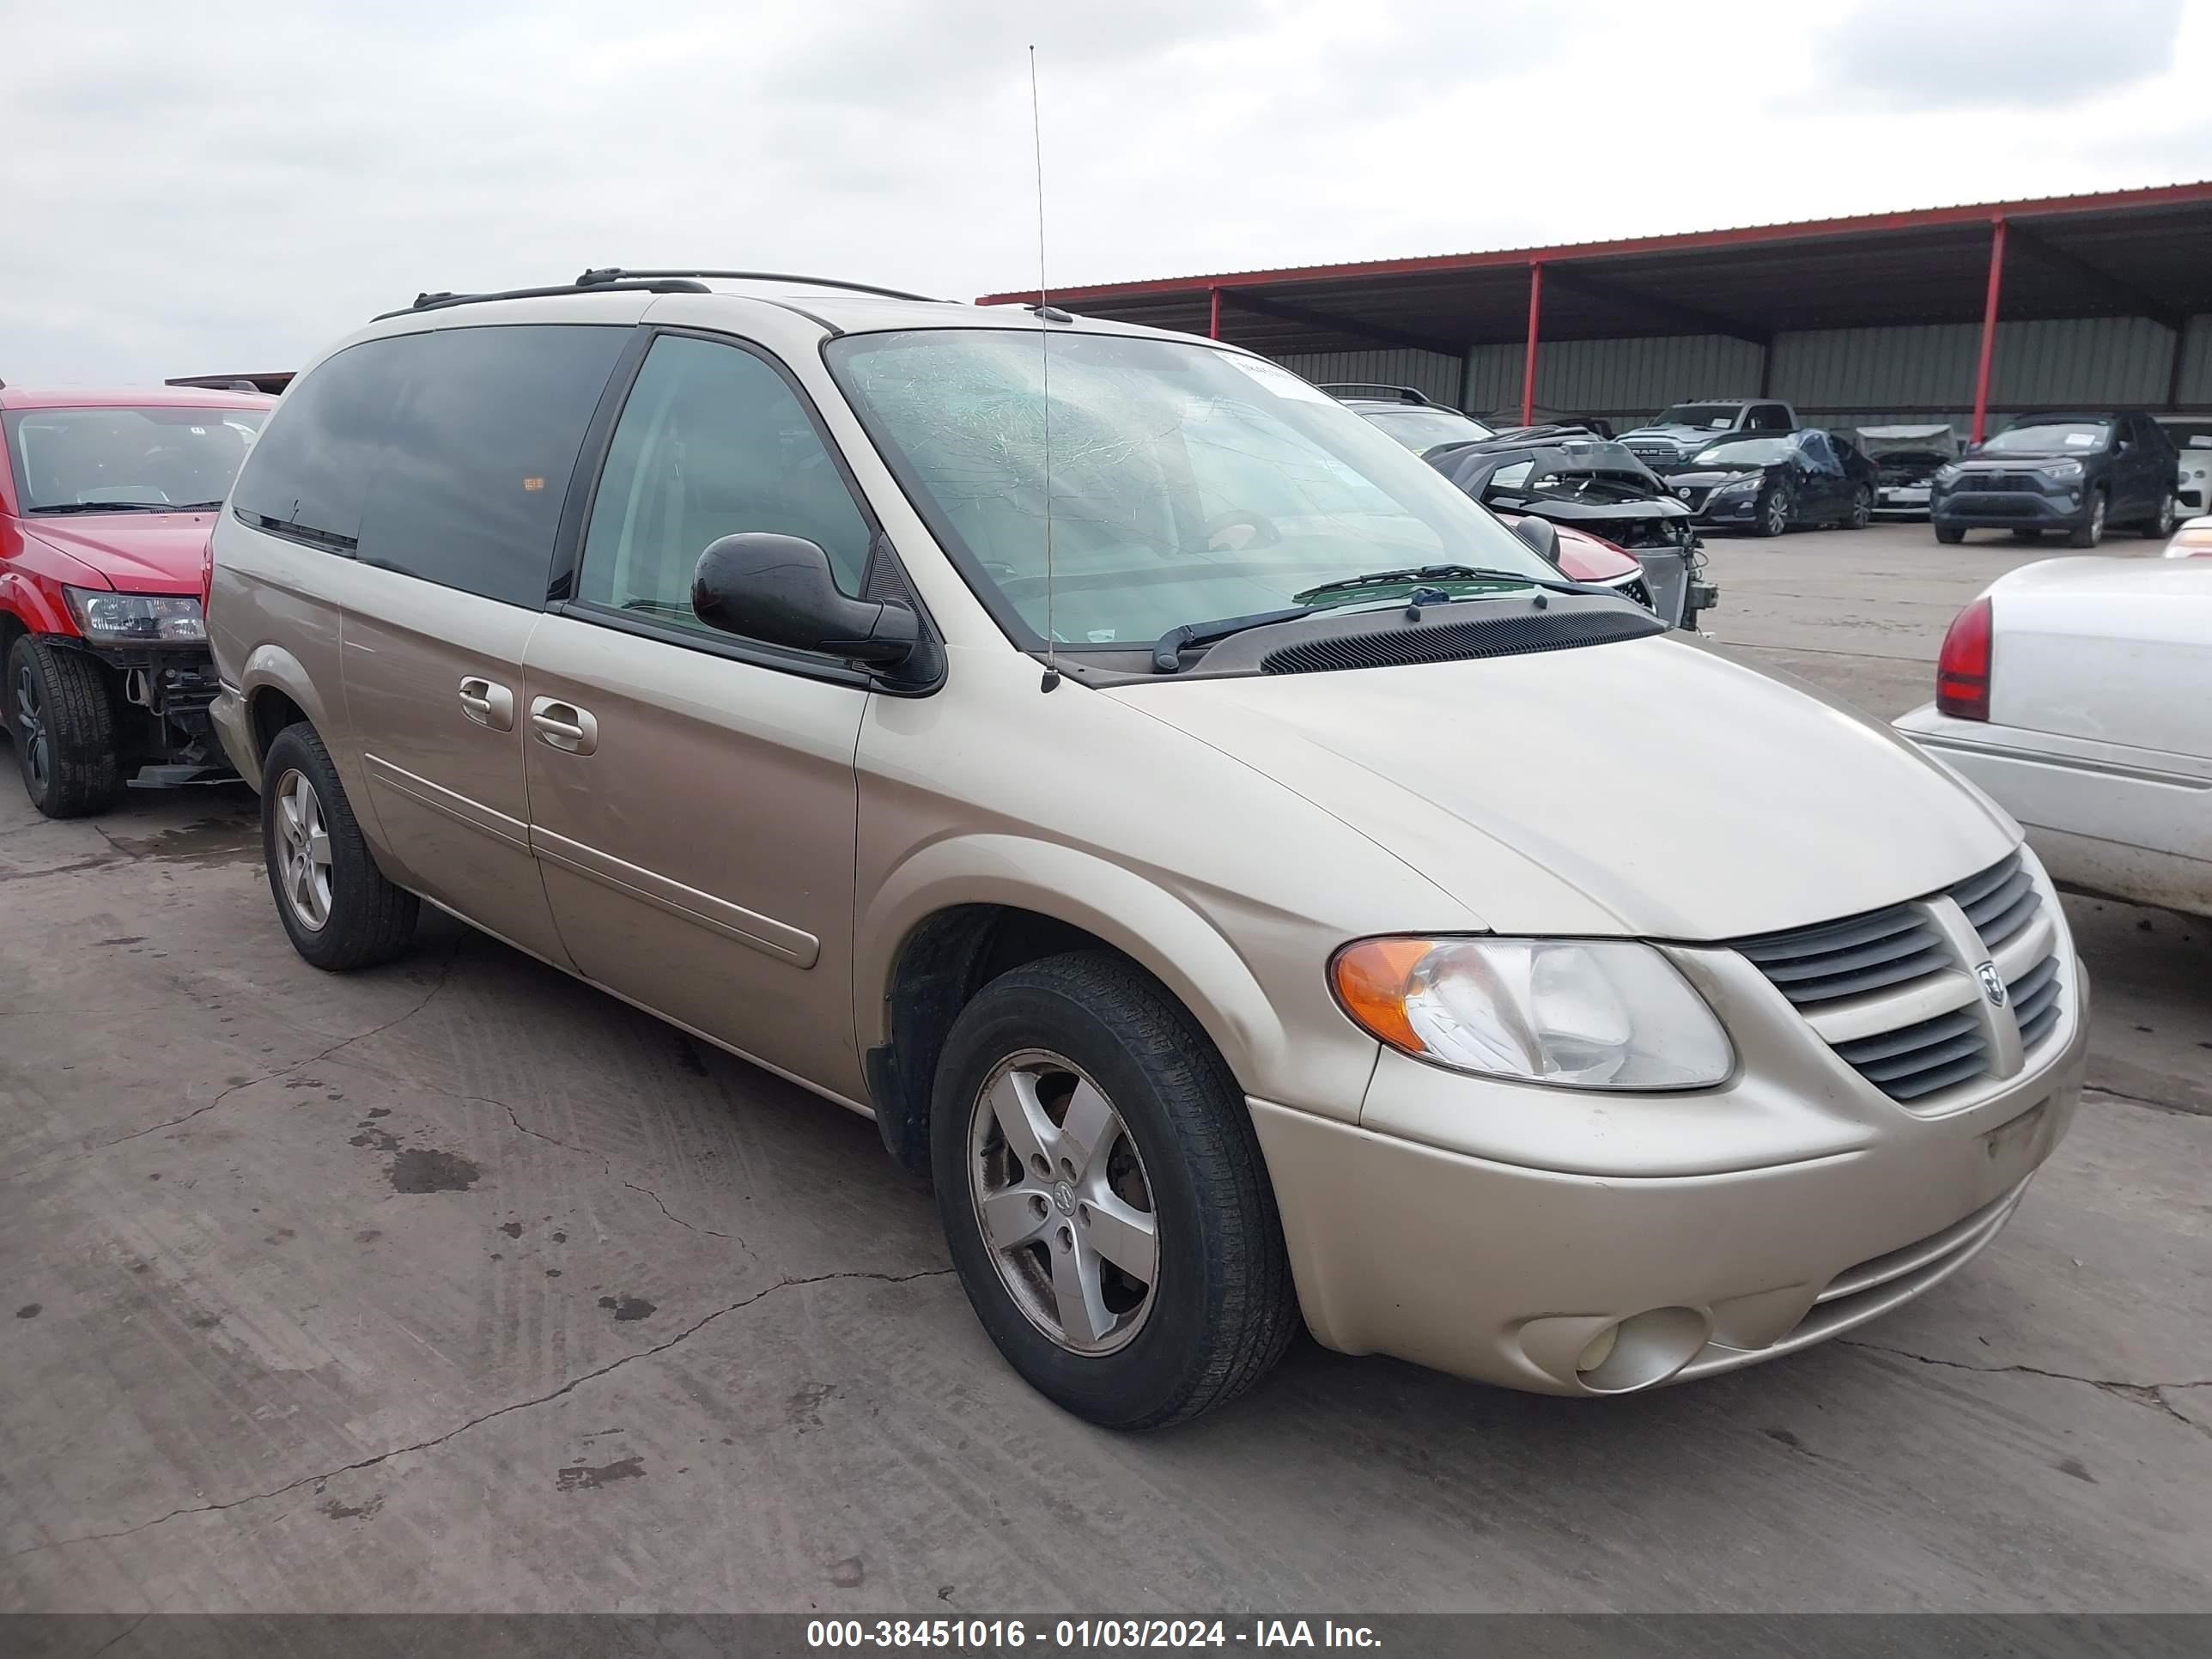 vin: 2D4GP44L37R296463 2D4GP44L37R296463 2007 dodge caravan 3800 for Sale in 78616, 2191 Highway 21 West, Dale, Texas, USA